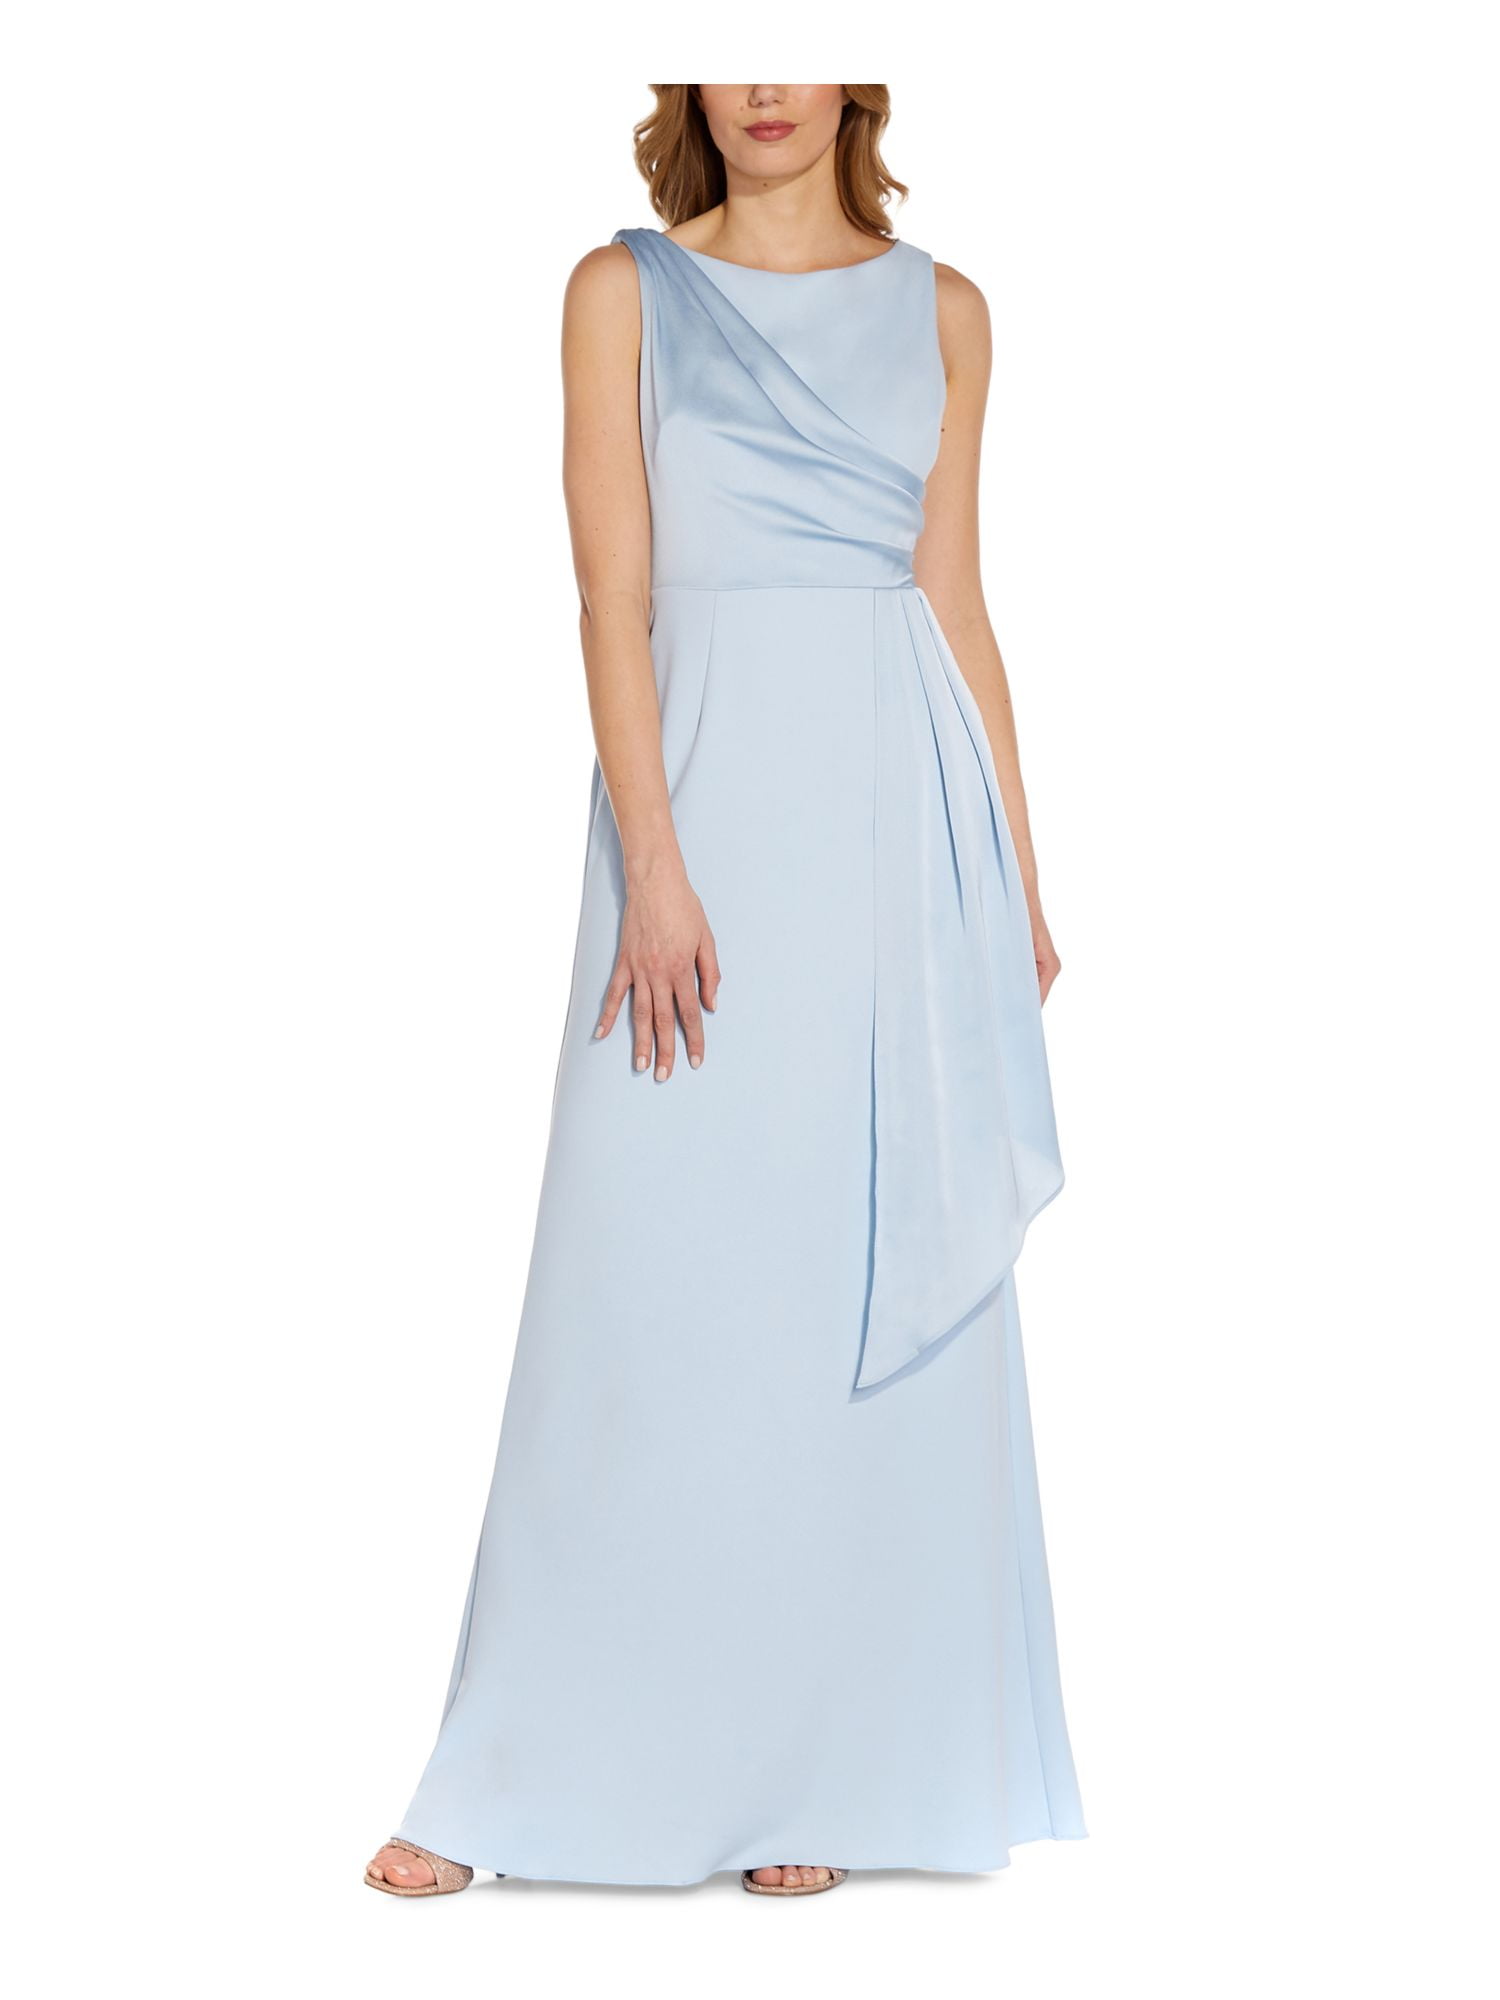 Adrianna Papell AP1E201431 Long Formal Evening Party Dress for $197.99 –  The Dress Outlet